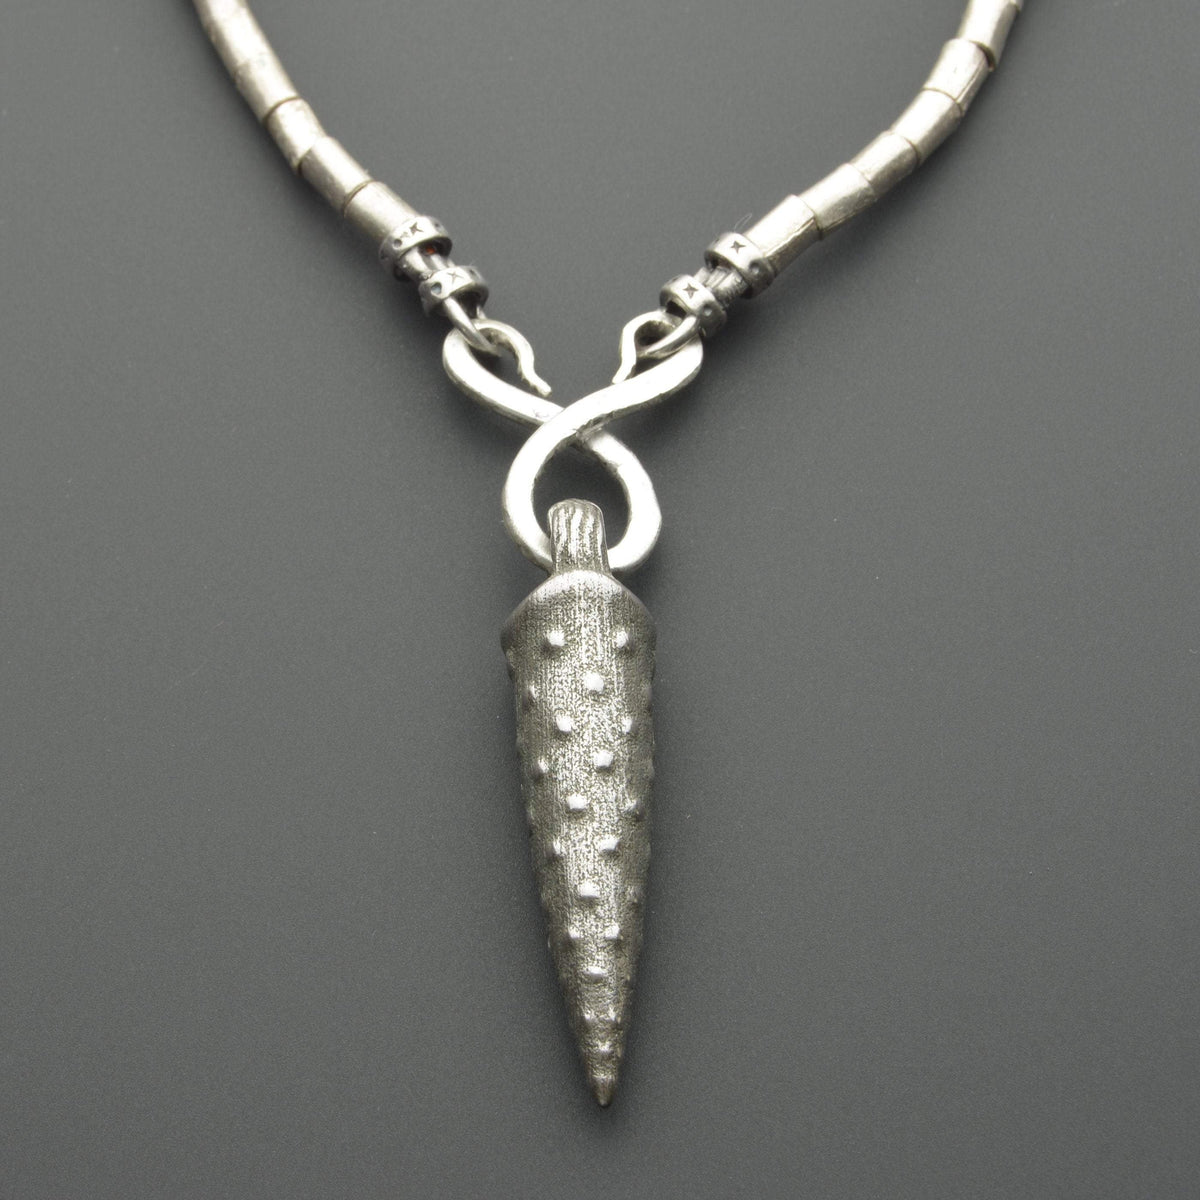 Iron bullet pendant with metal necklace